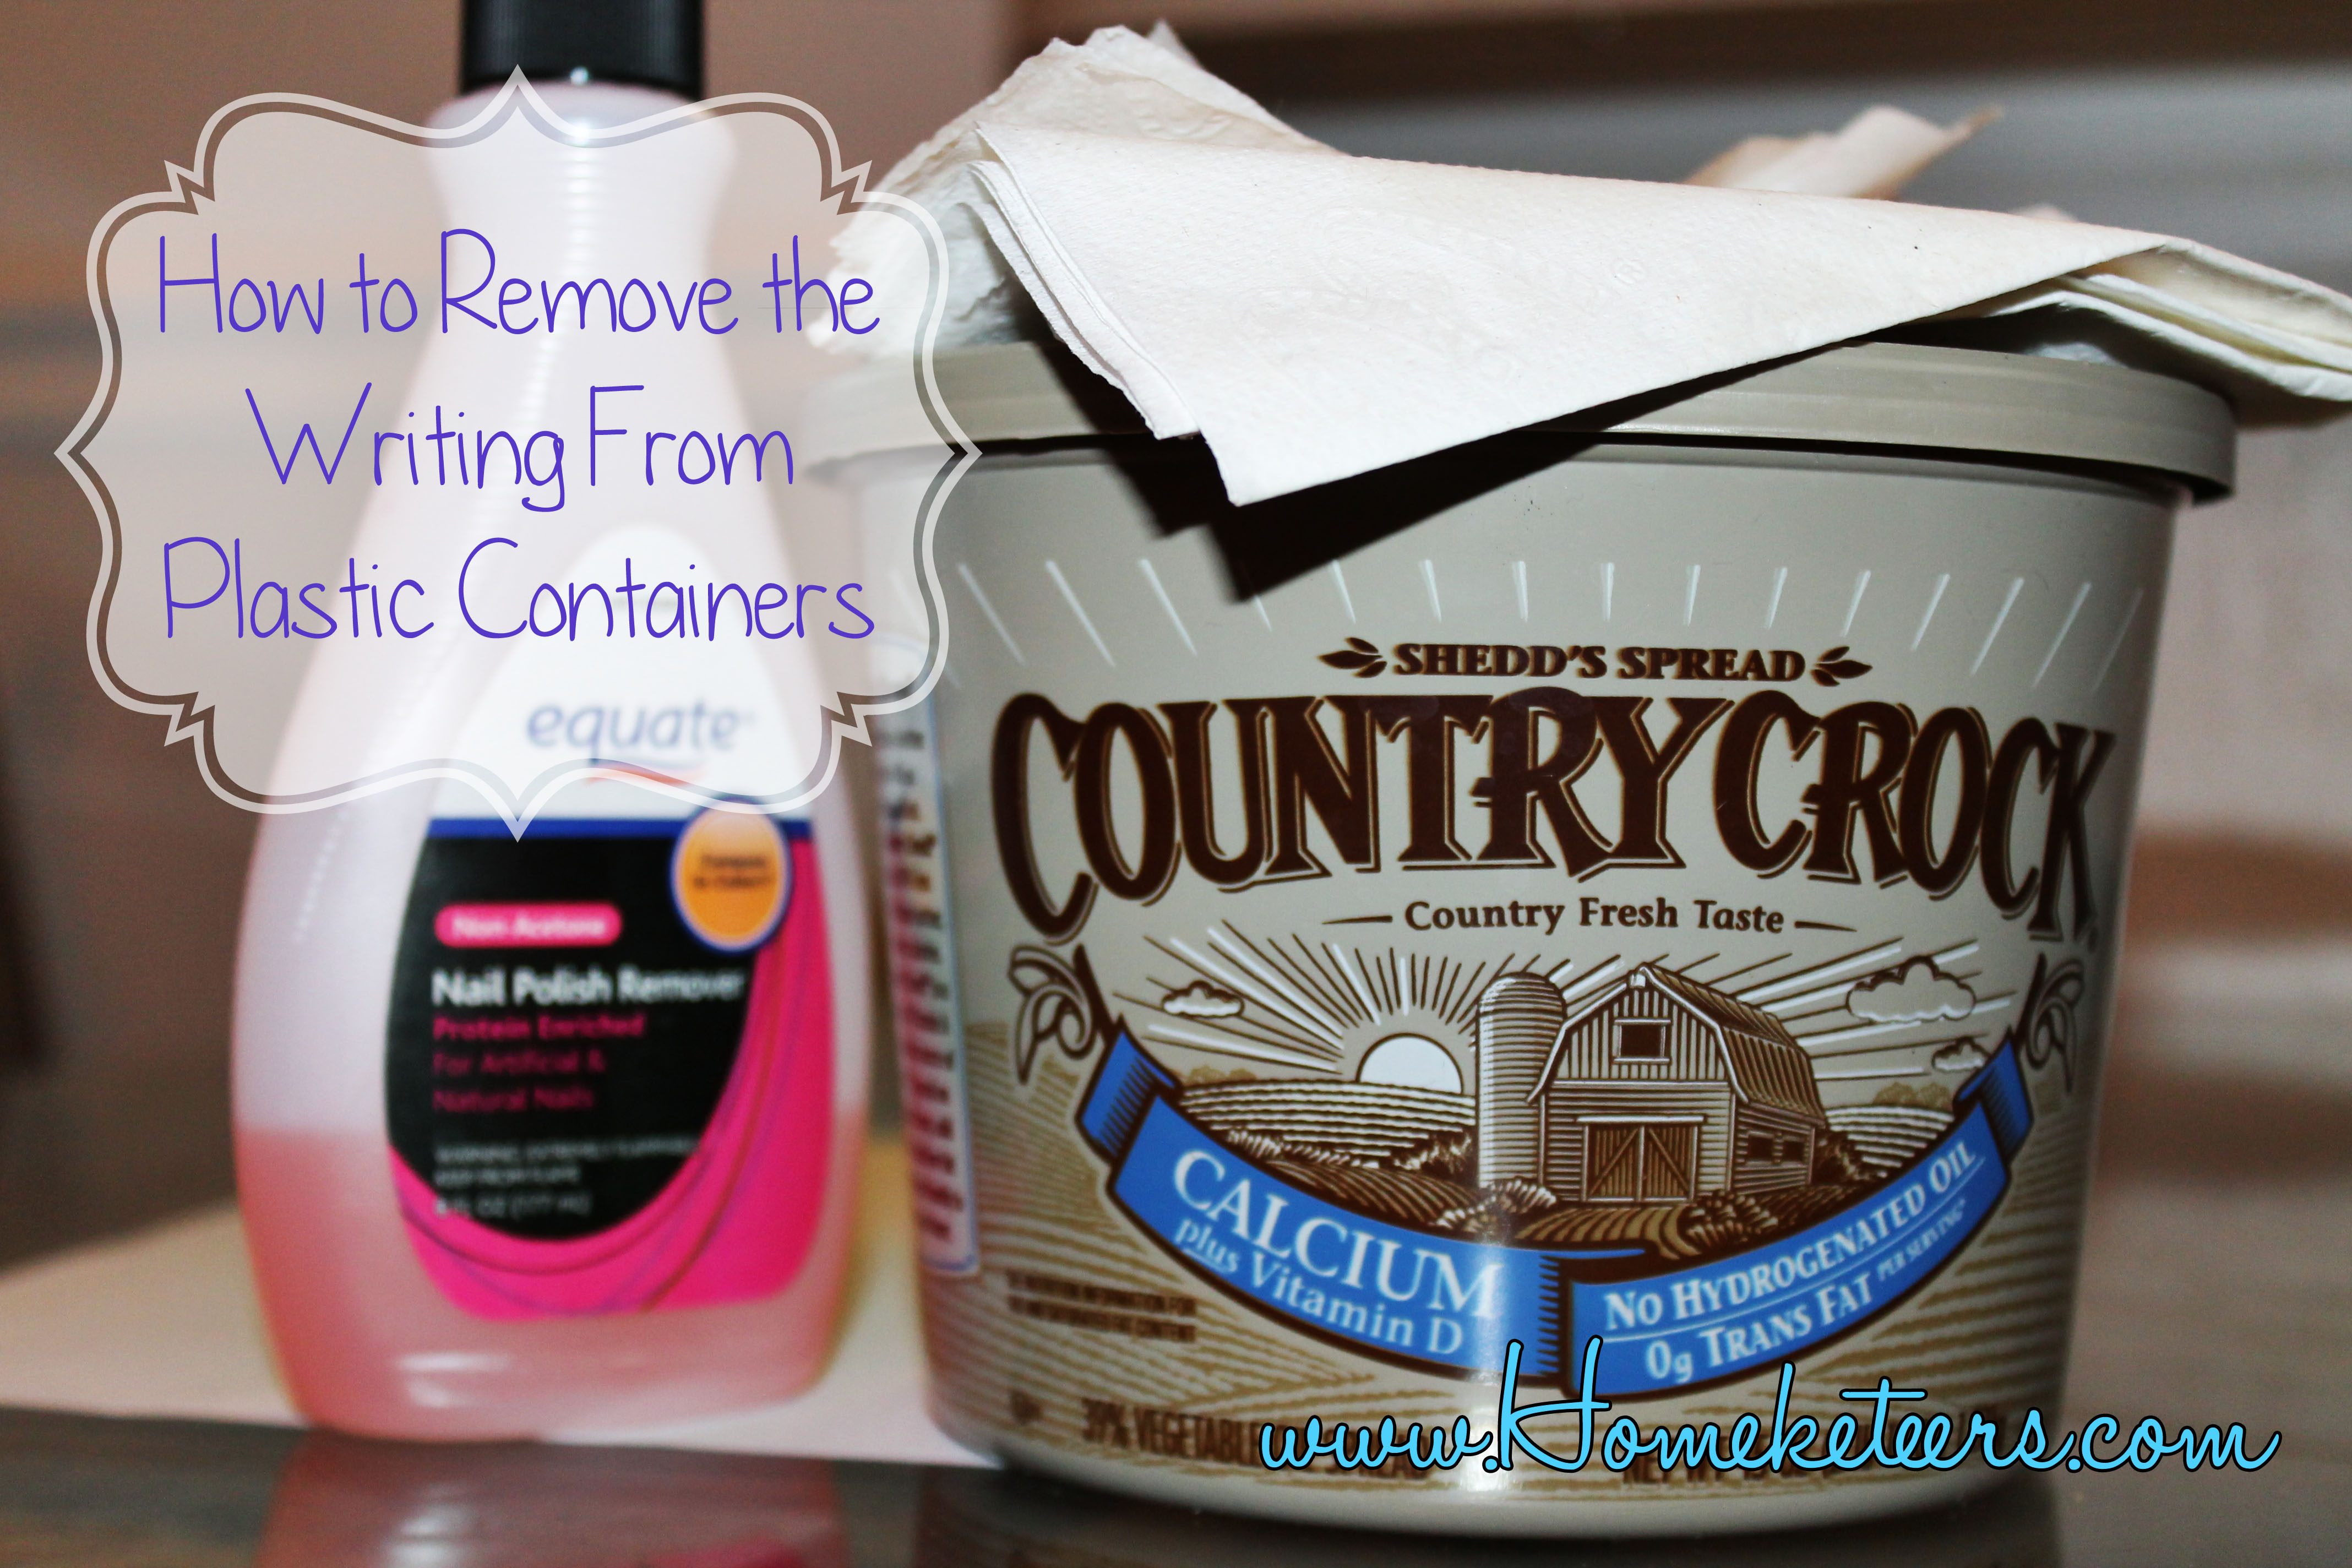 How to Remove Writing From Plastic Containers